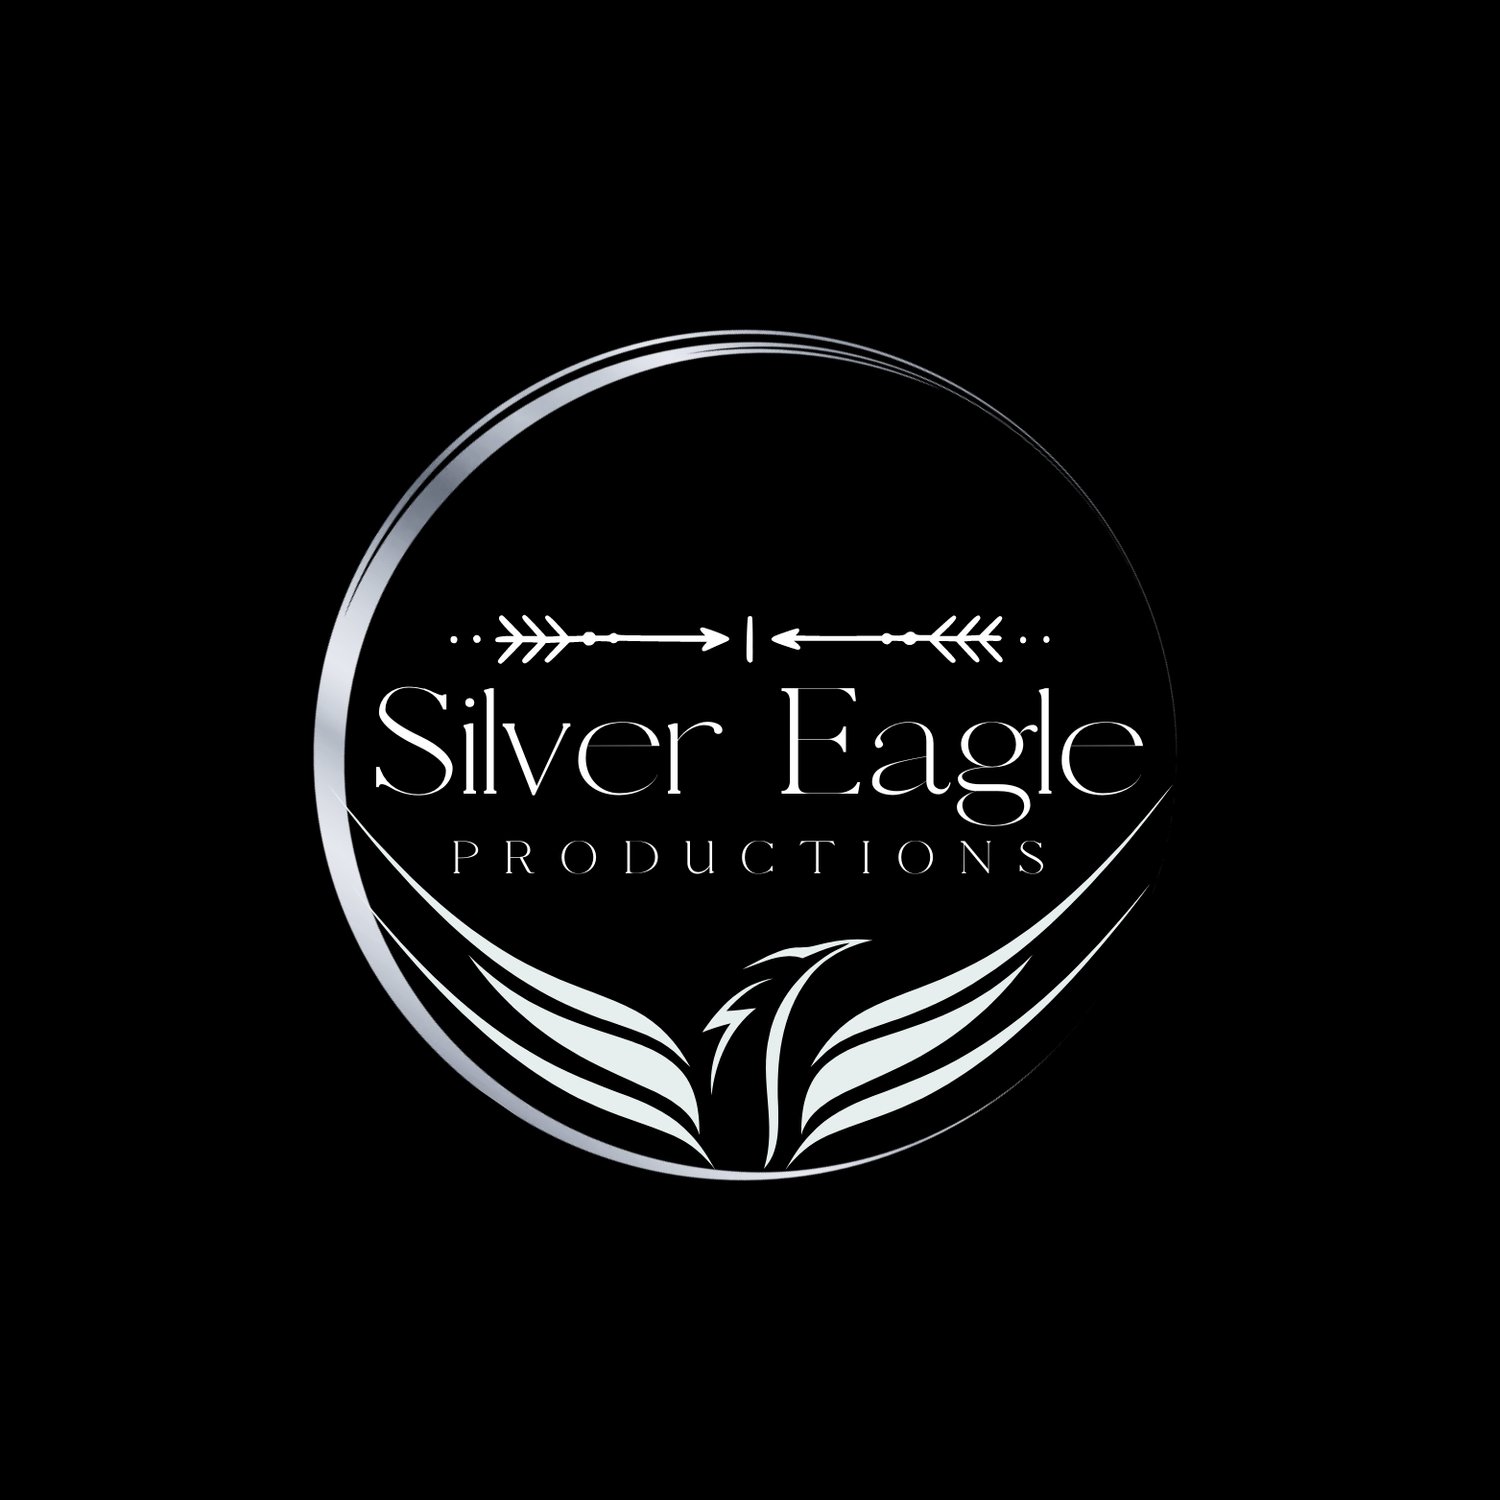 Silver Eagle Productions